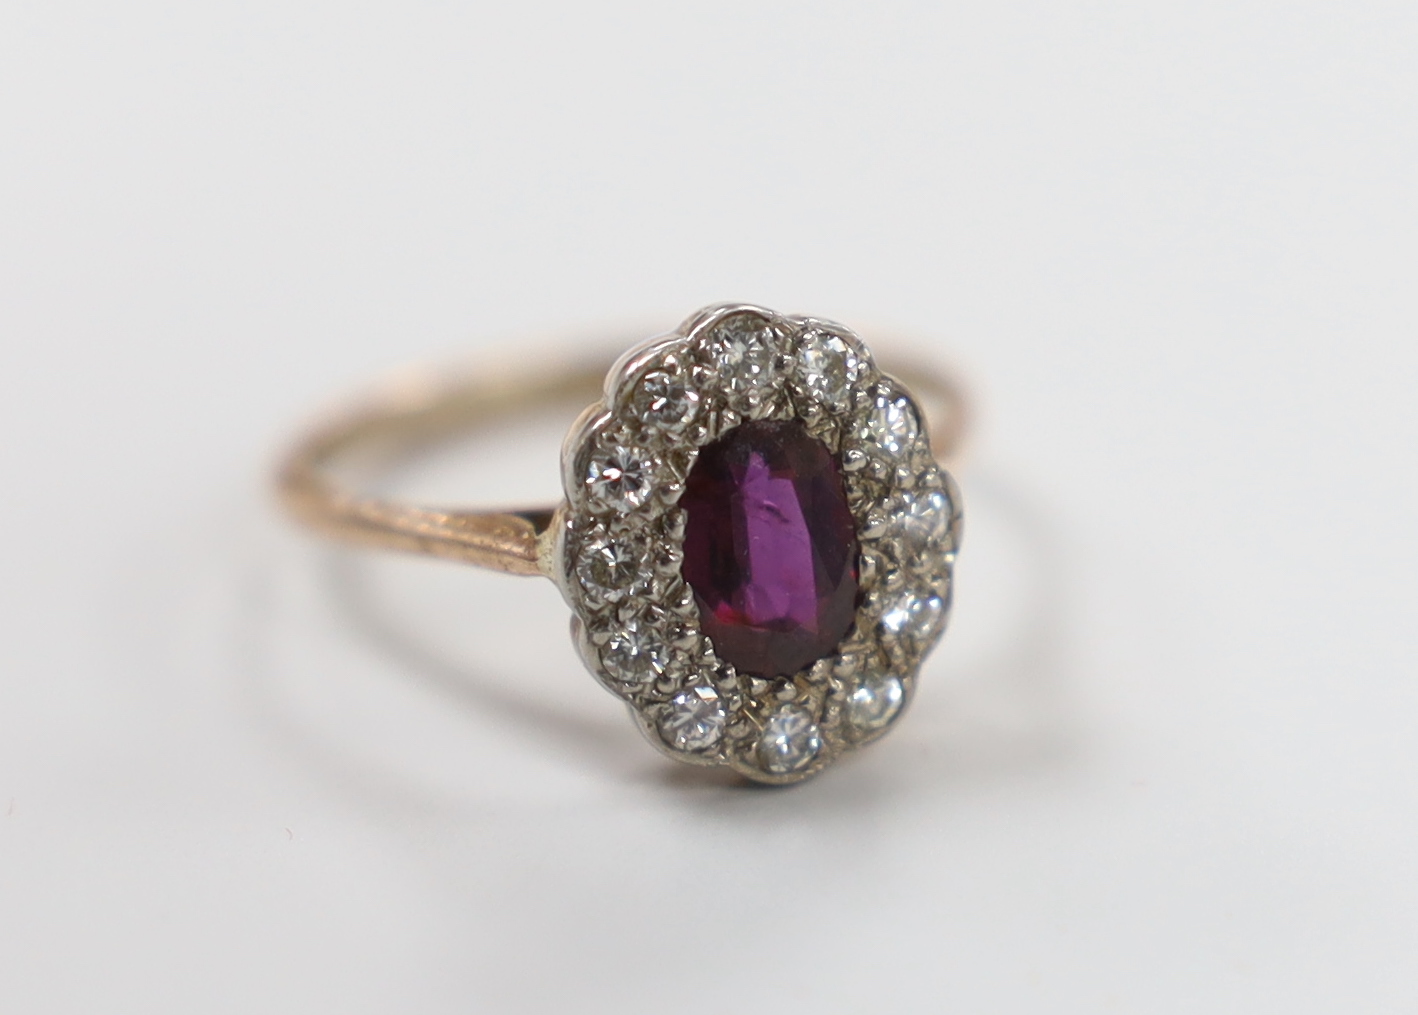 A 9k gold, diamond and garnet cluster ring, size L